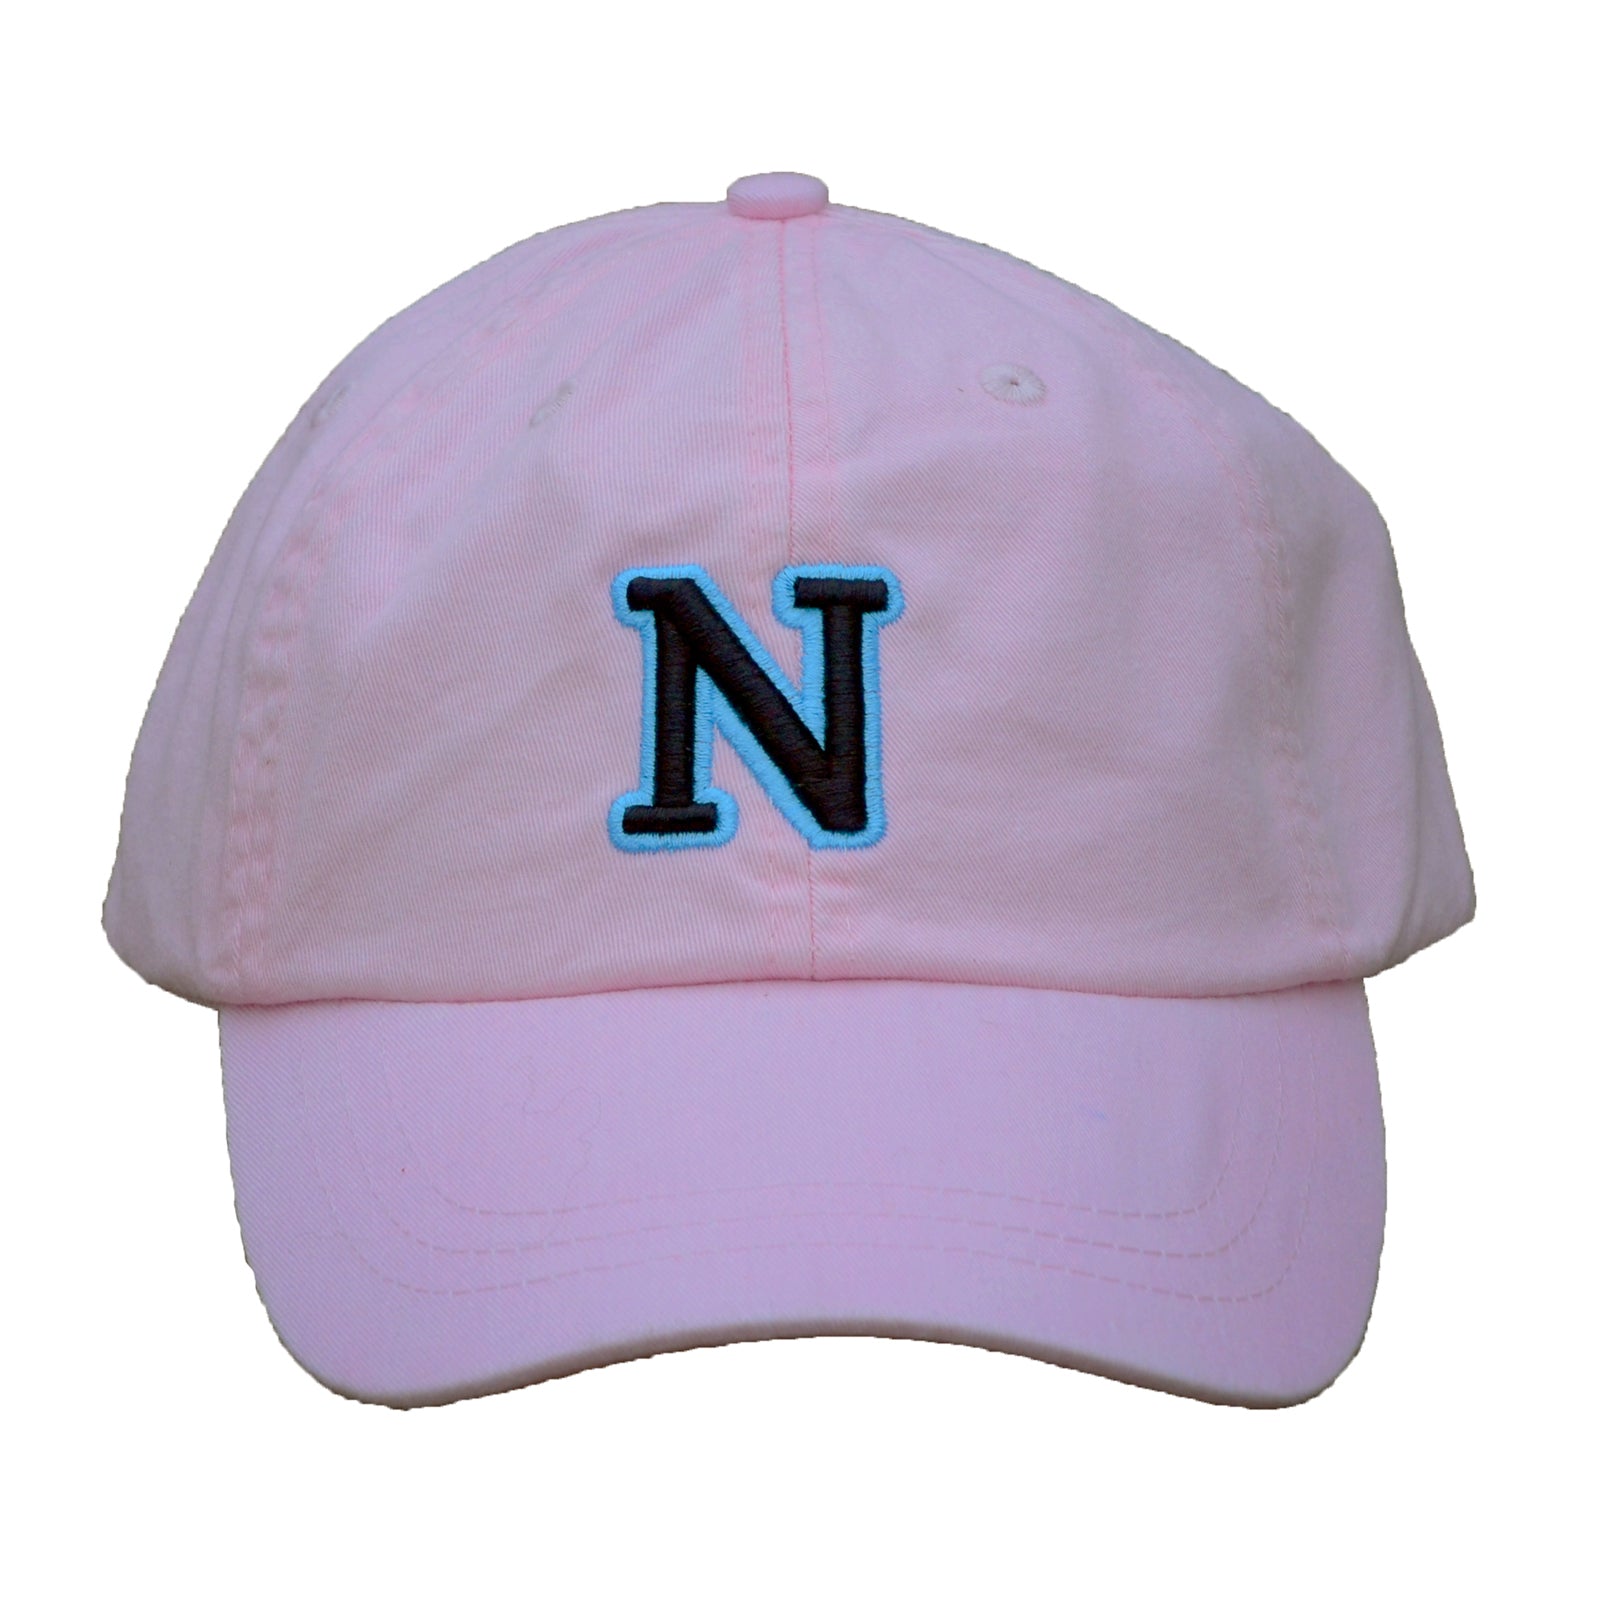 N (for newf), embroidered cap - pink & black/blue